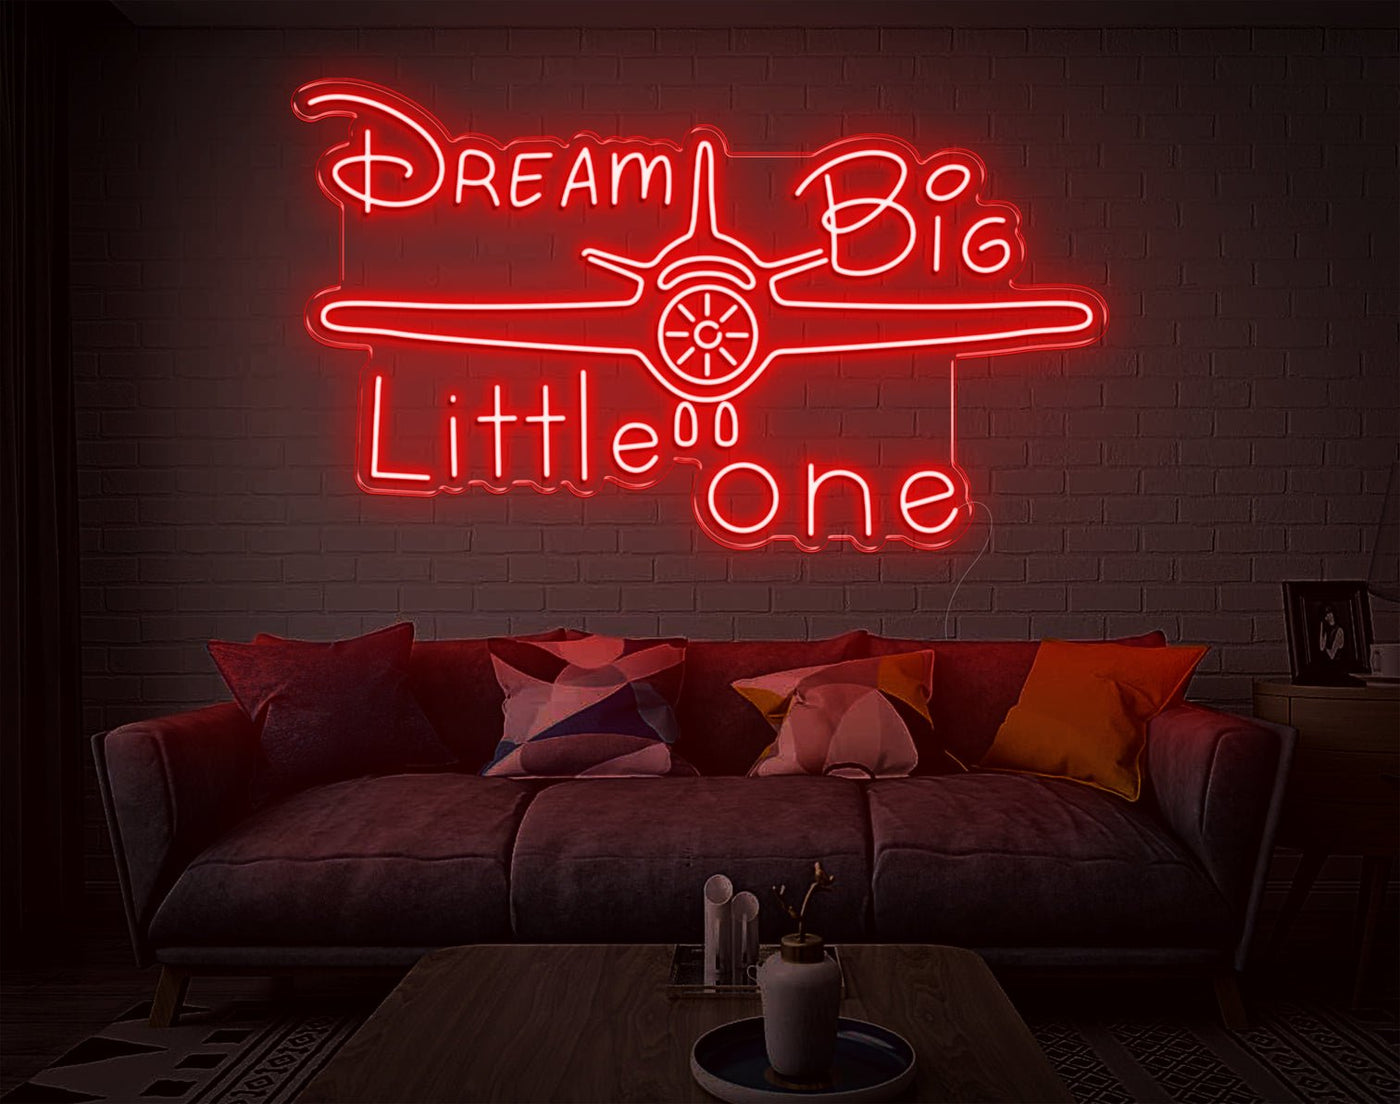 Dream Big Little One LED Neon Sign - 24inch x 42inchRed